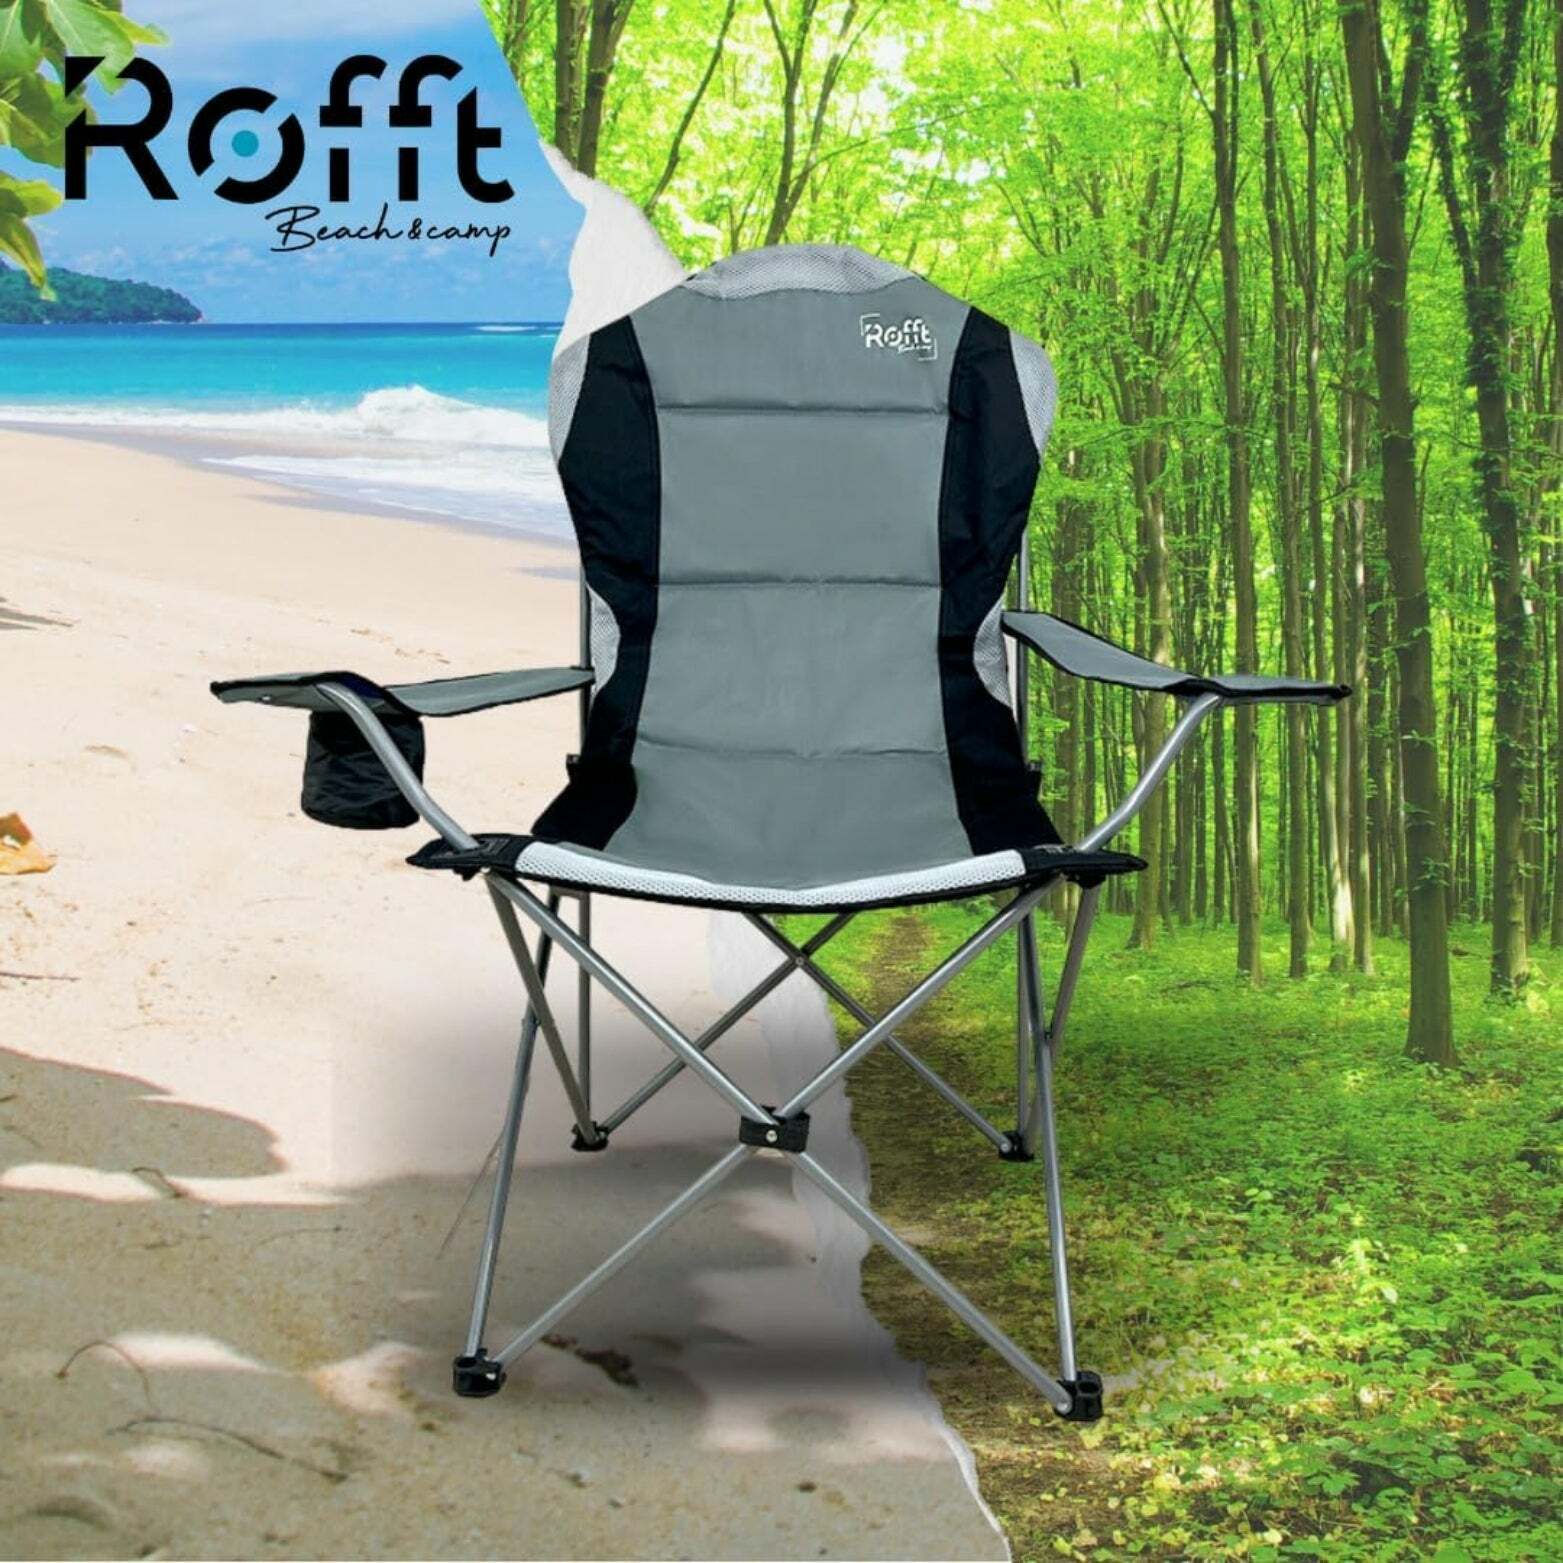 ROFFT Portable Camping Chair with Cooler - Collapsible, Comfort Padded, Cup Holder, Carry Bag Included, Grey